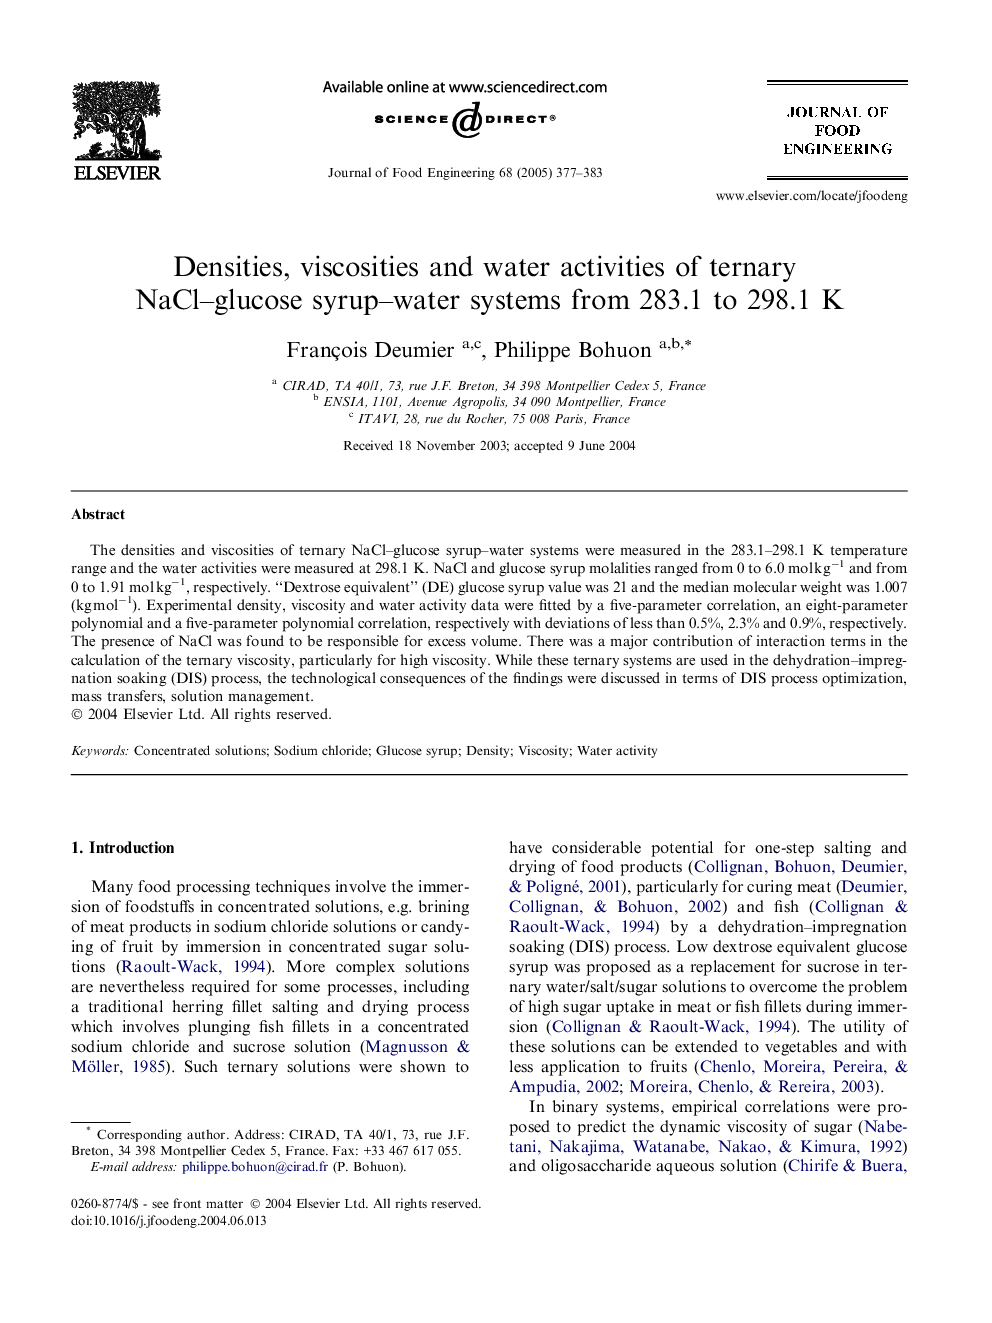 Densities, viscosities and water activities of ternary NaCl-glucose syrup-water systems from 283.1 to 298.1 K